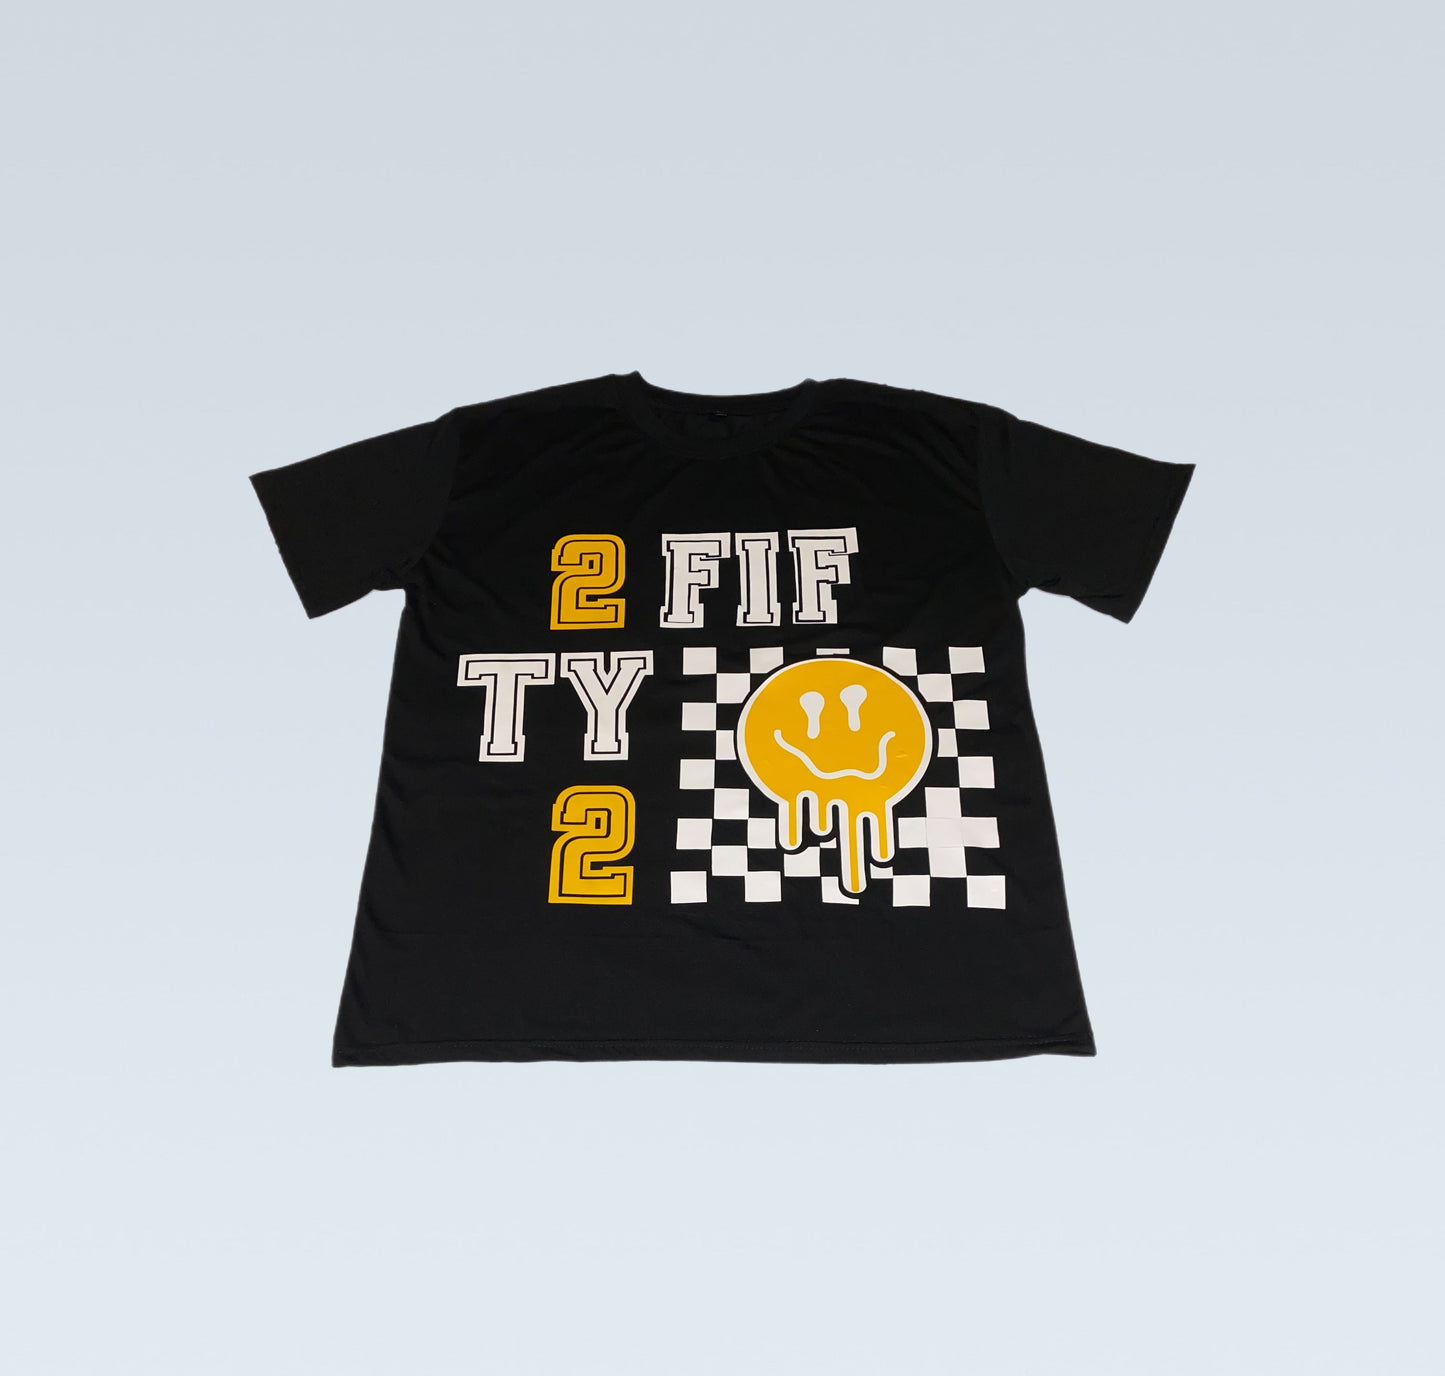 Boys graphic tee shirt - 2fifty2